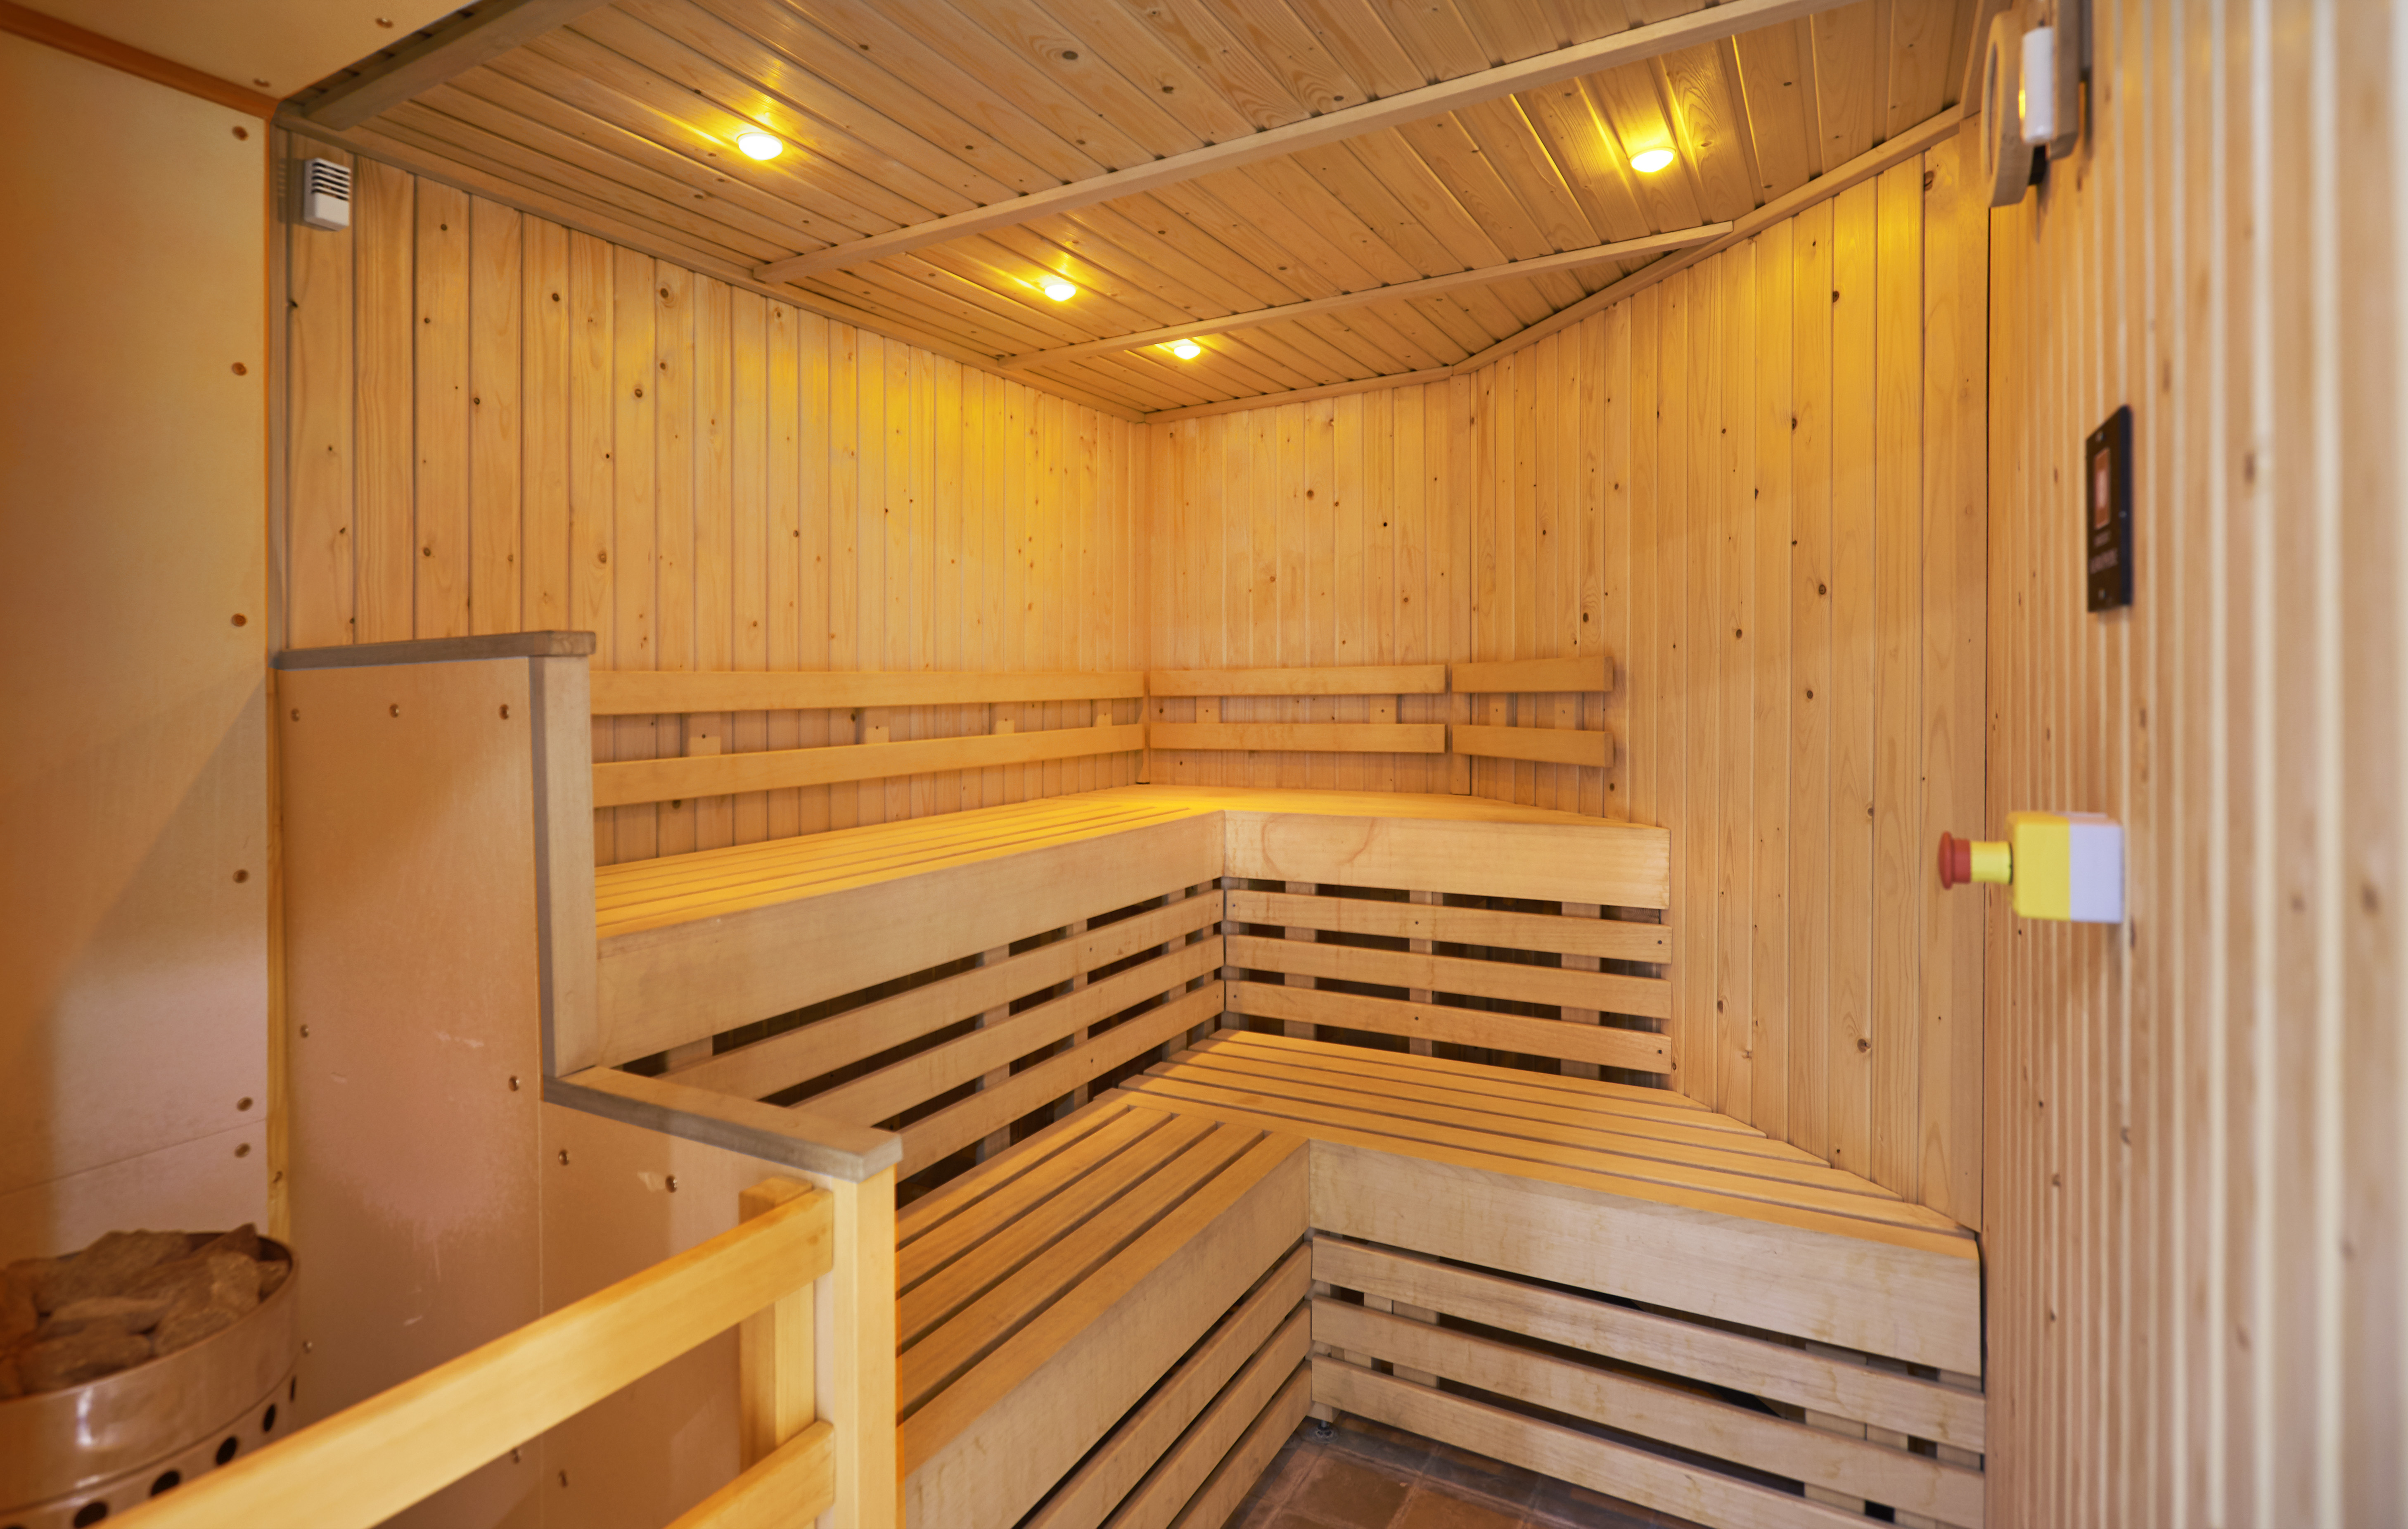  Illuminated Wooden Sauna Interior With Bench Seating and Heater in Corner